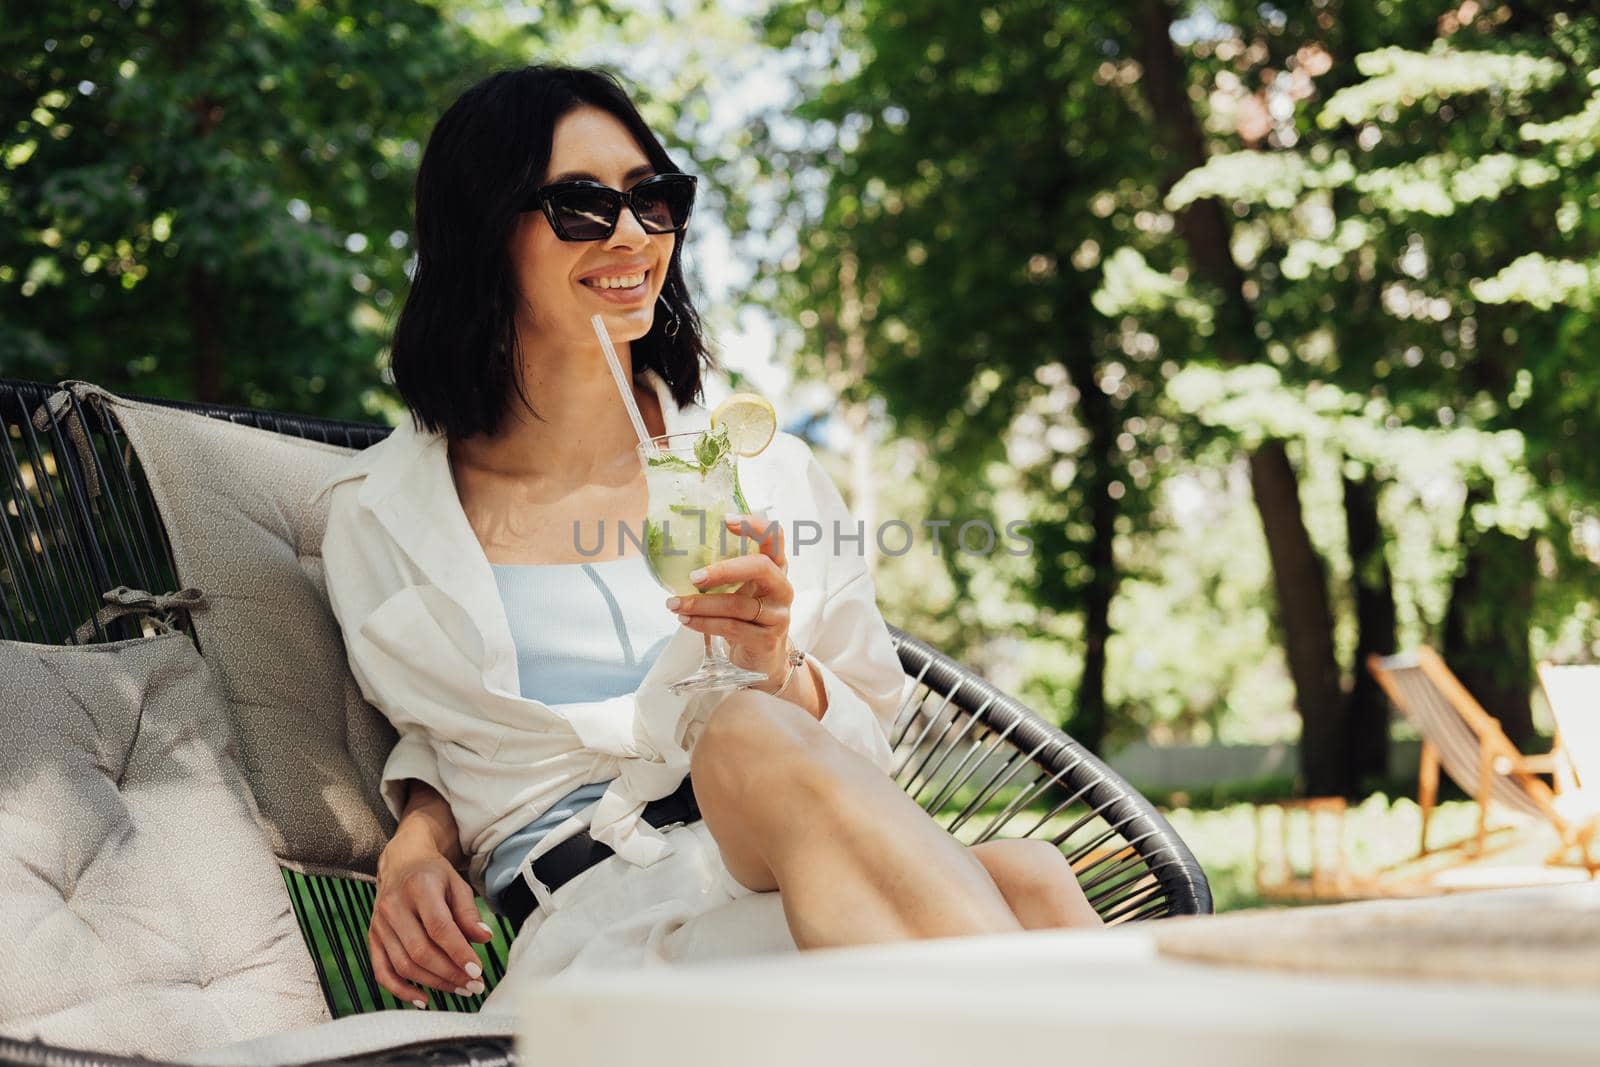 Young Brunette Woman Relaxing and Drinking Cocktail While Sitting on the Restaurant Terrace Outdoors in Summer Sunny Day